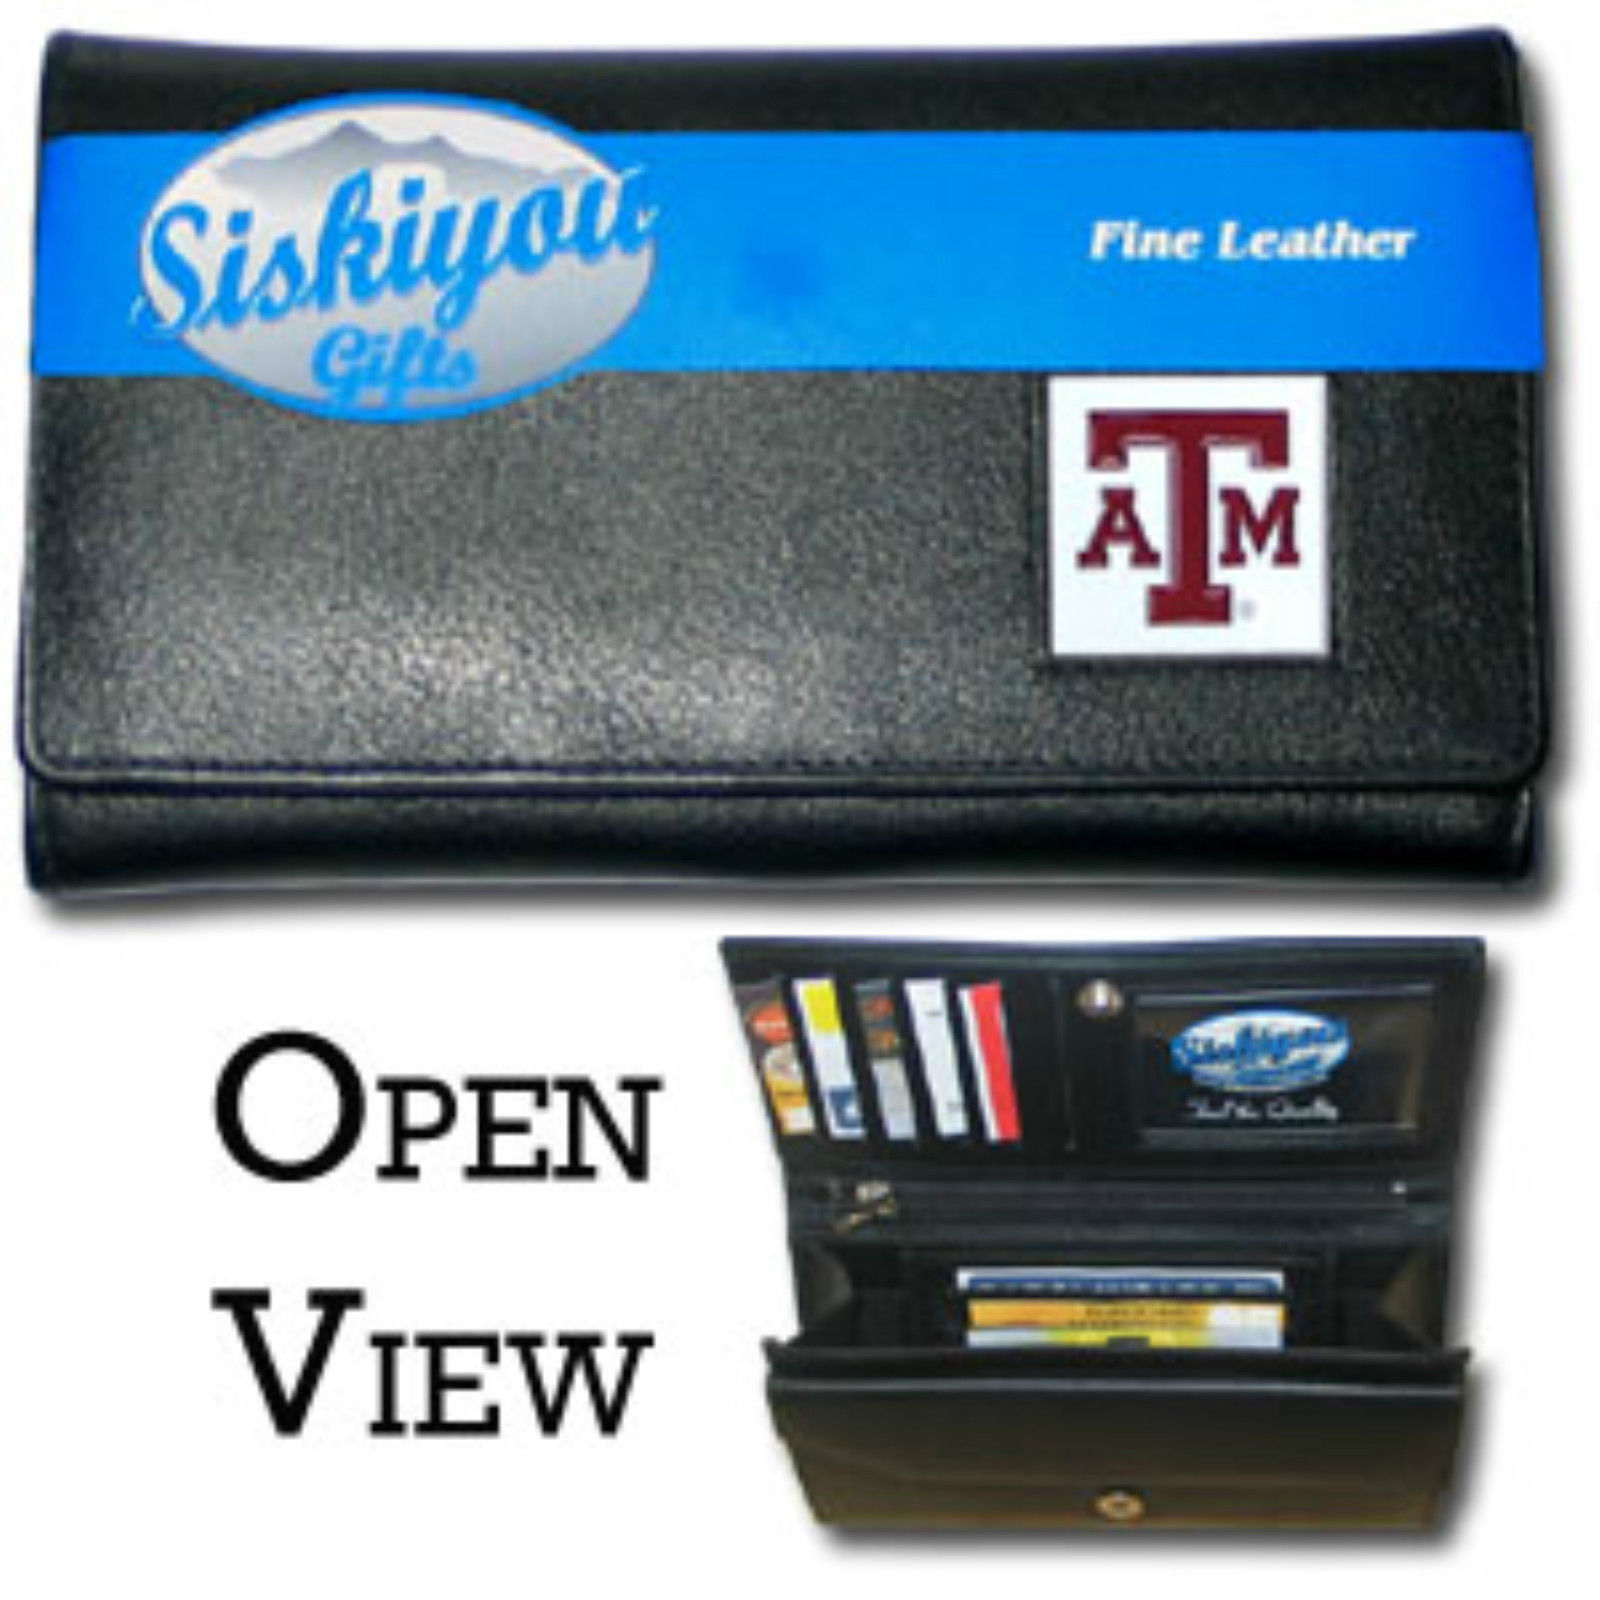 TEXAS A&M AGGIES NCAA SPORTS LADIES LEATHER CLUTCH WALLET - $28.93